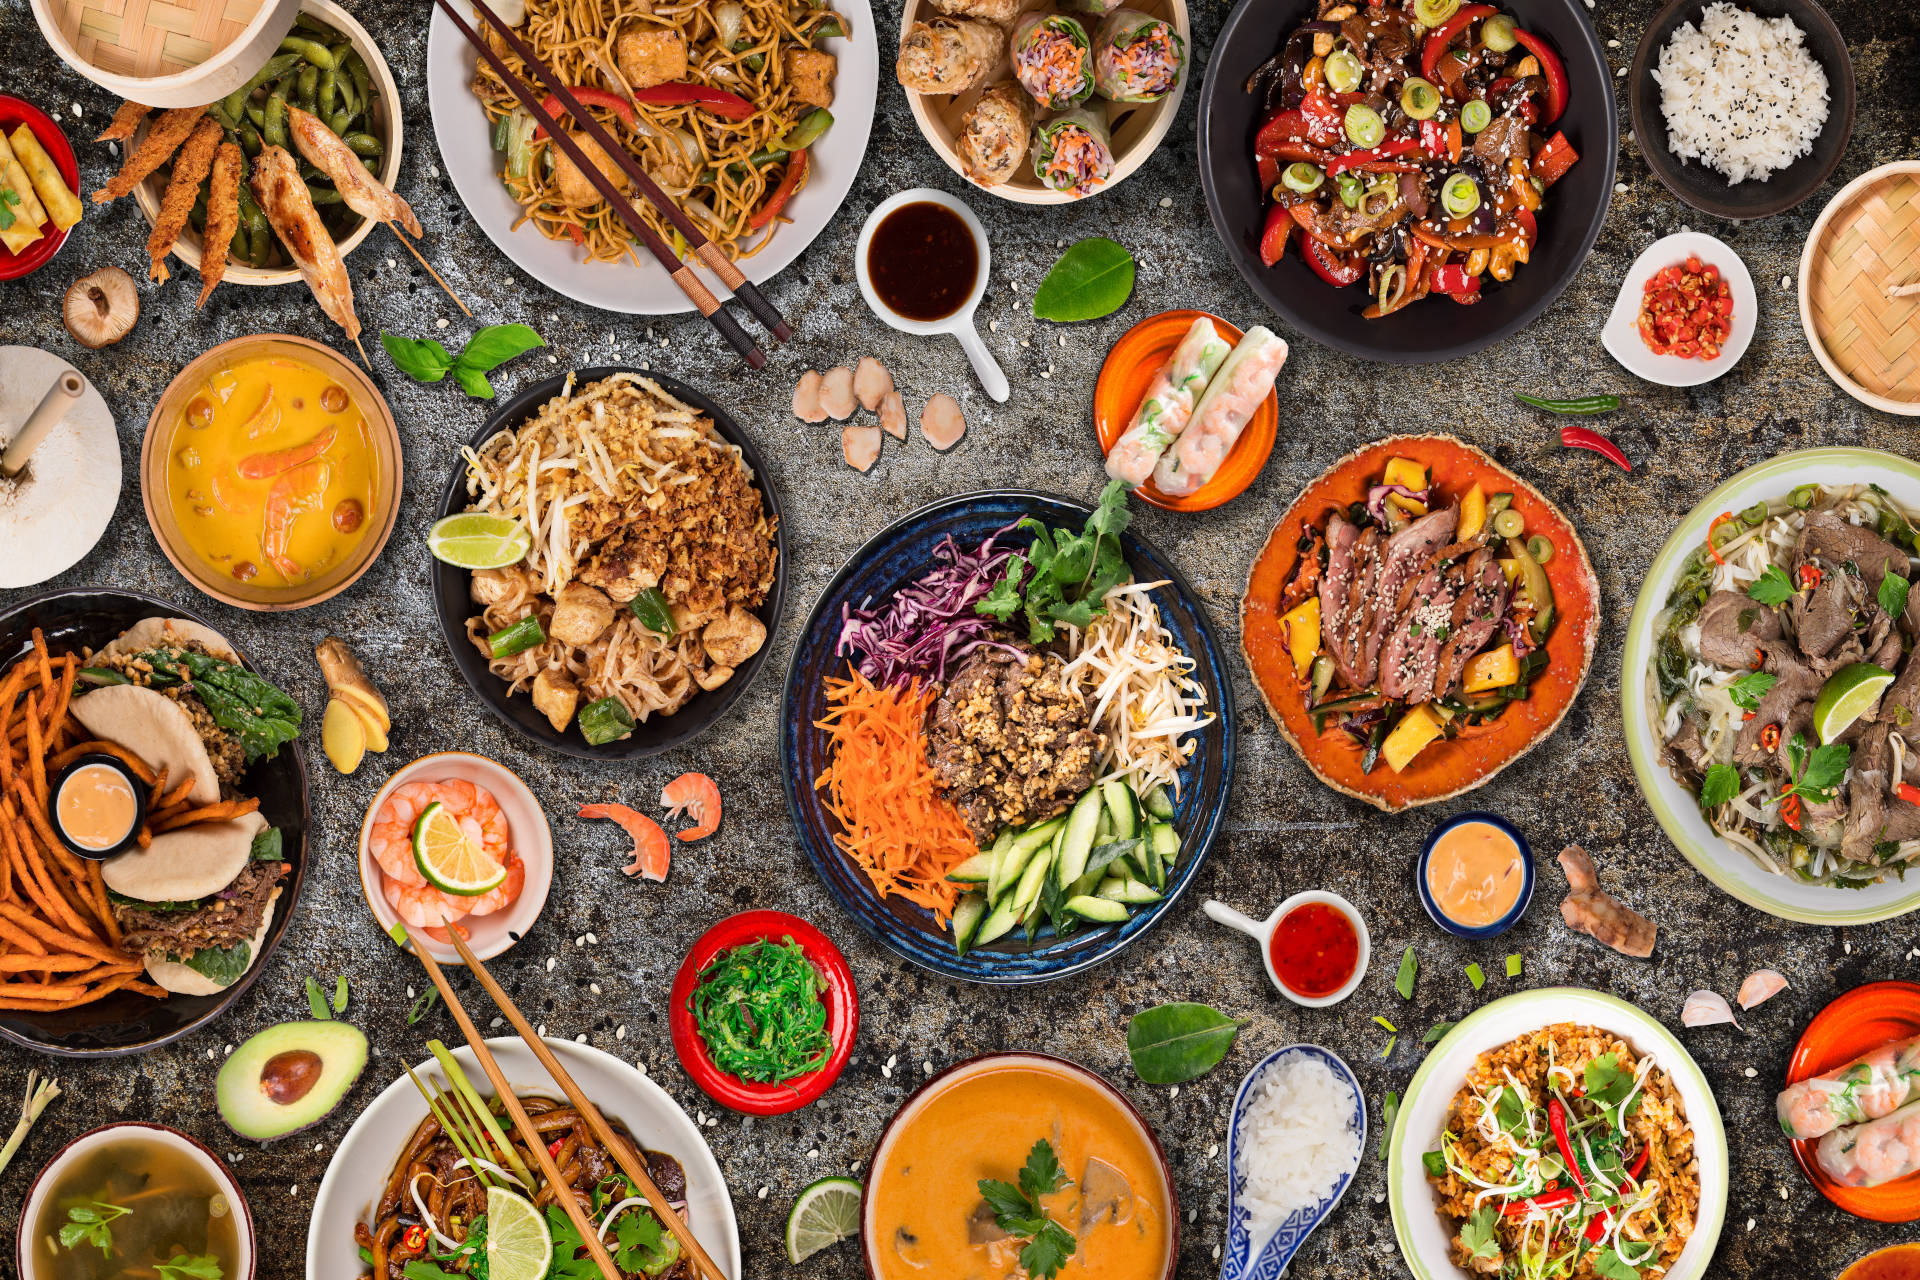 Asian,Food,Background,With,Various,Ingredients,On,Rustic,Stone,Background,Asian,Food,Background,With,Various,Ingredients,On,Rustic,Stone,Background